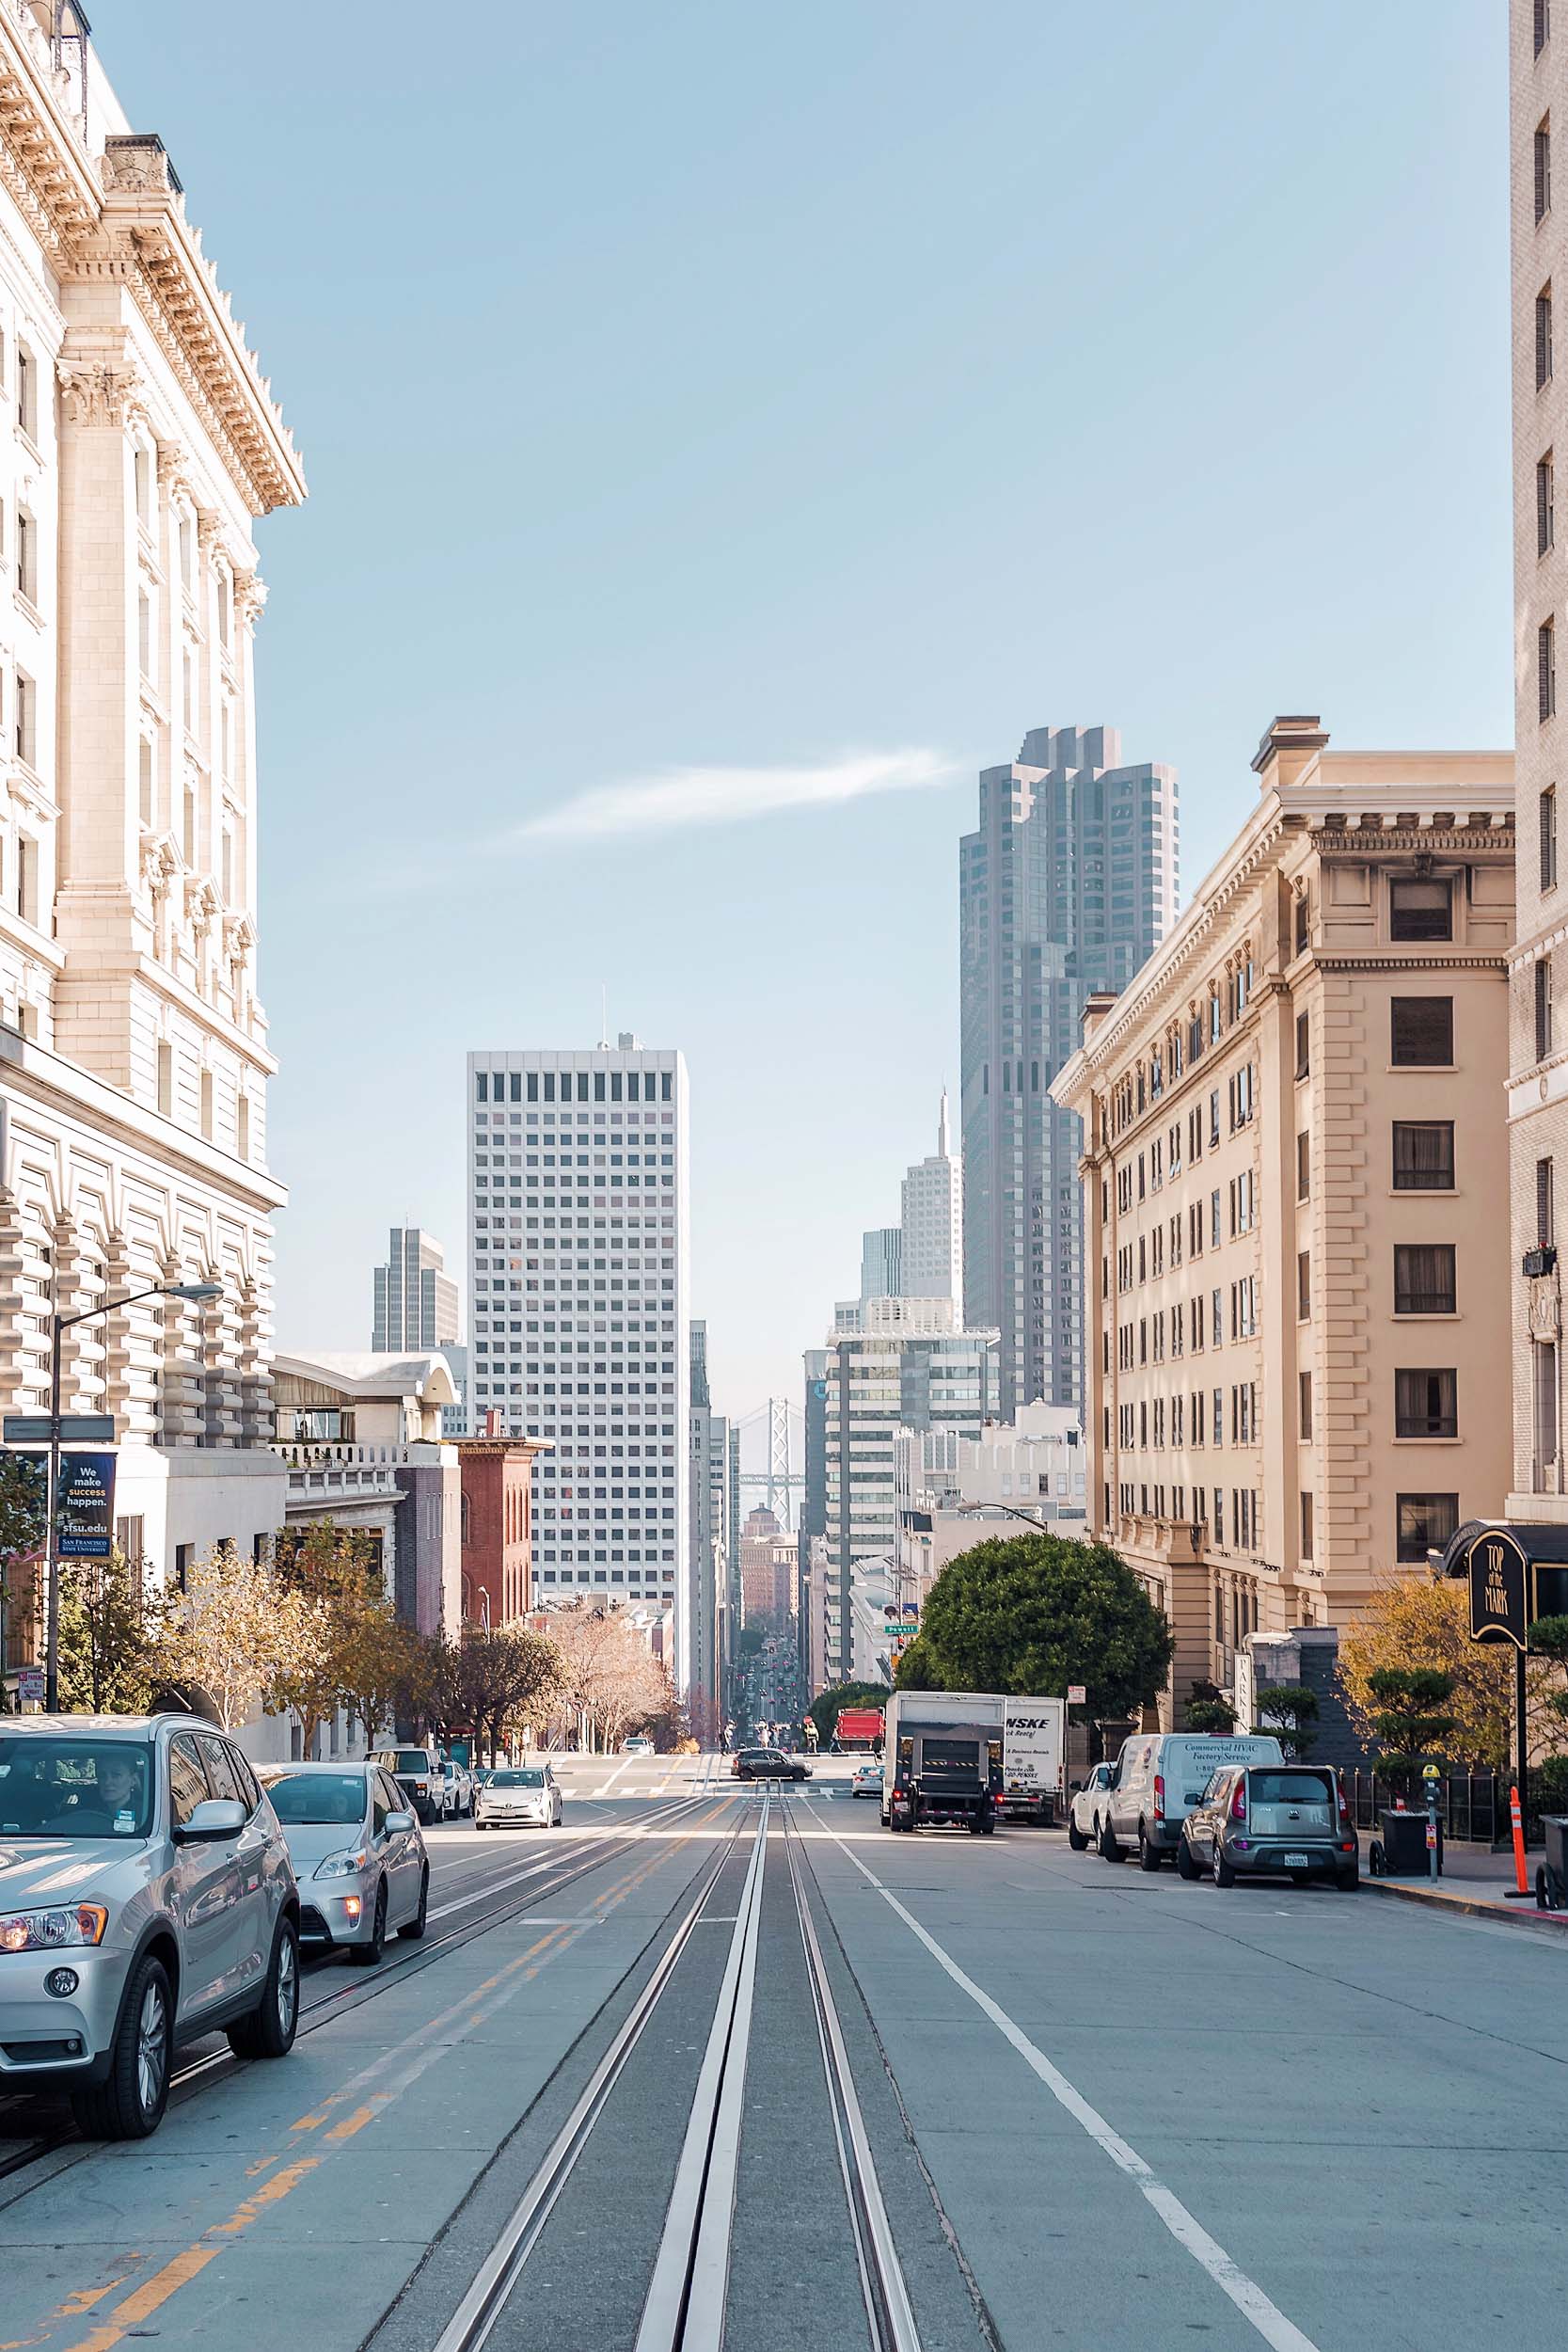 Fairmont San Francisco is centrally located on top of Nob Hill, offering beautiful panoramic city views.  It’s the only spot in SF where all of the cable car lines meet!